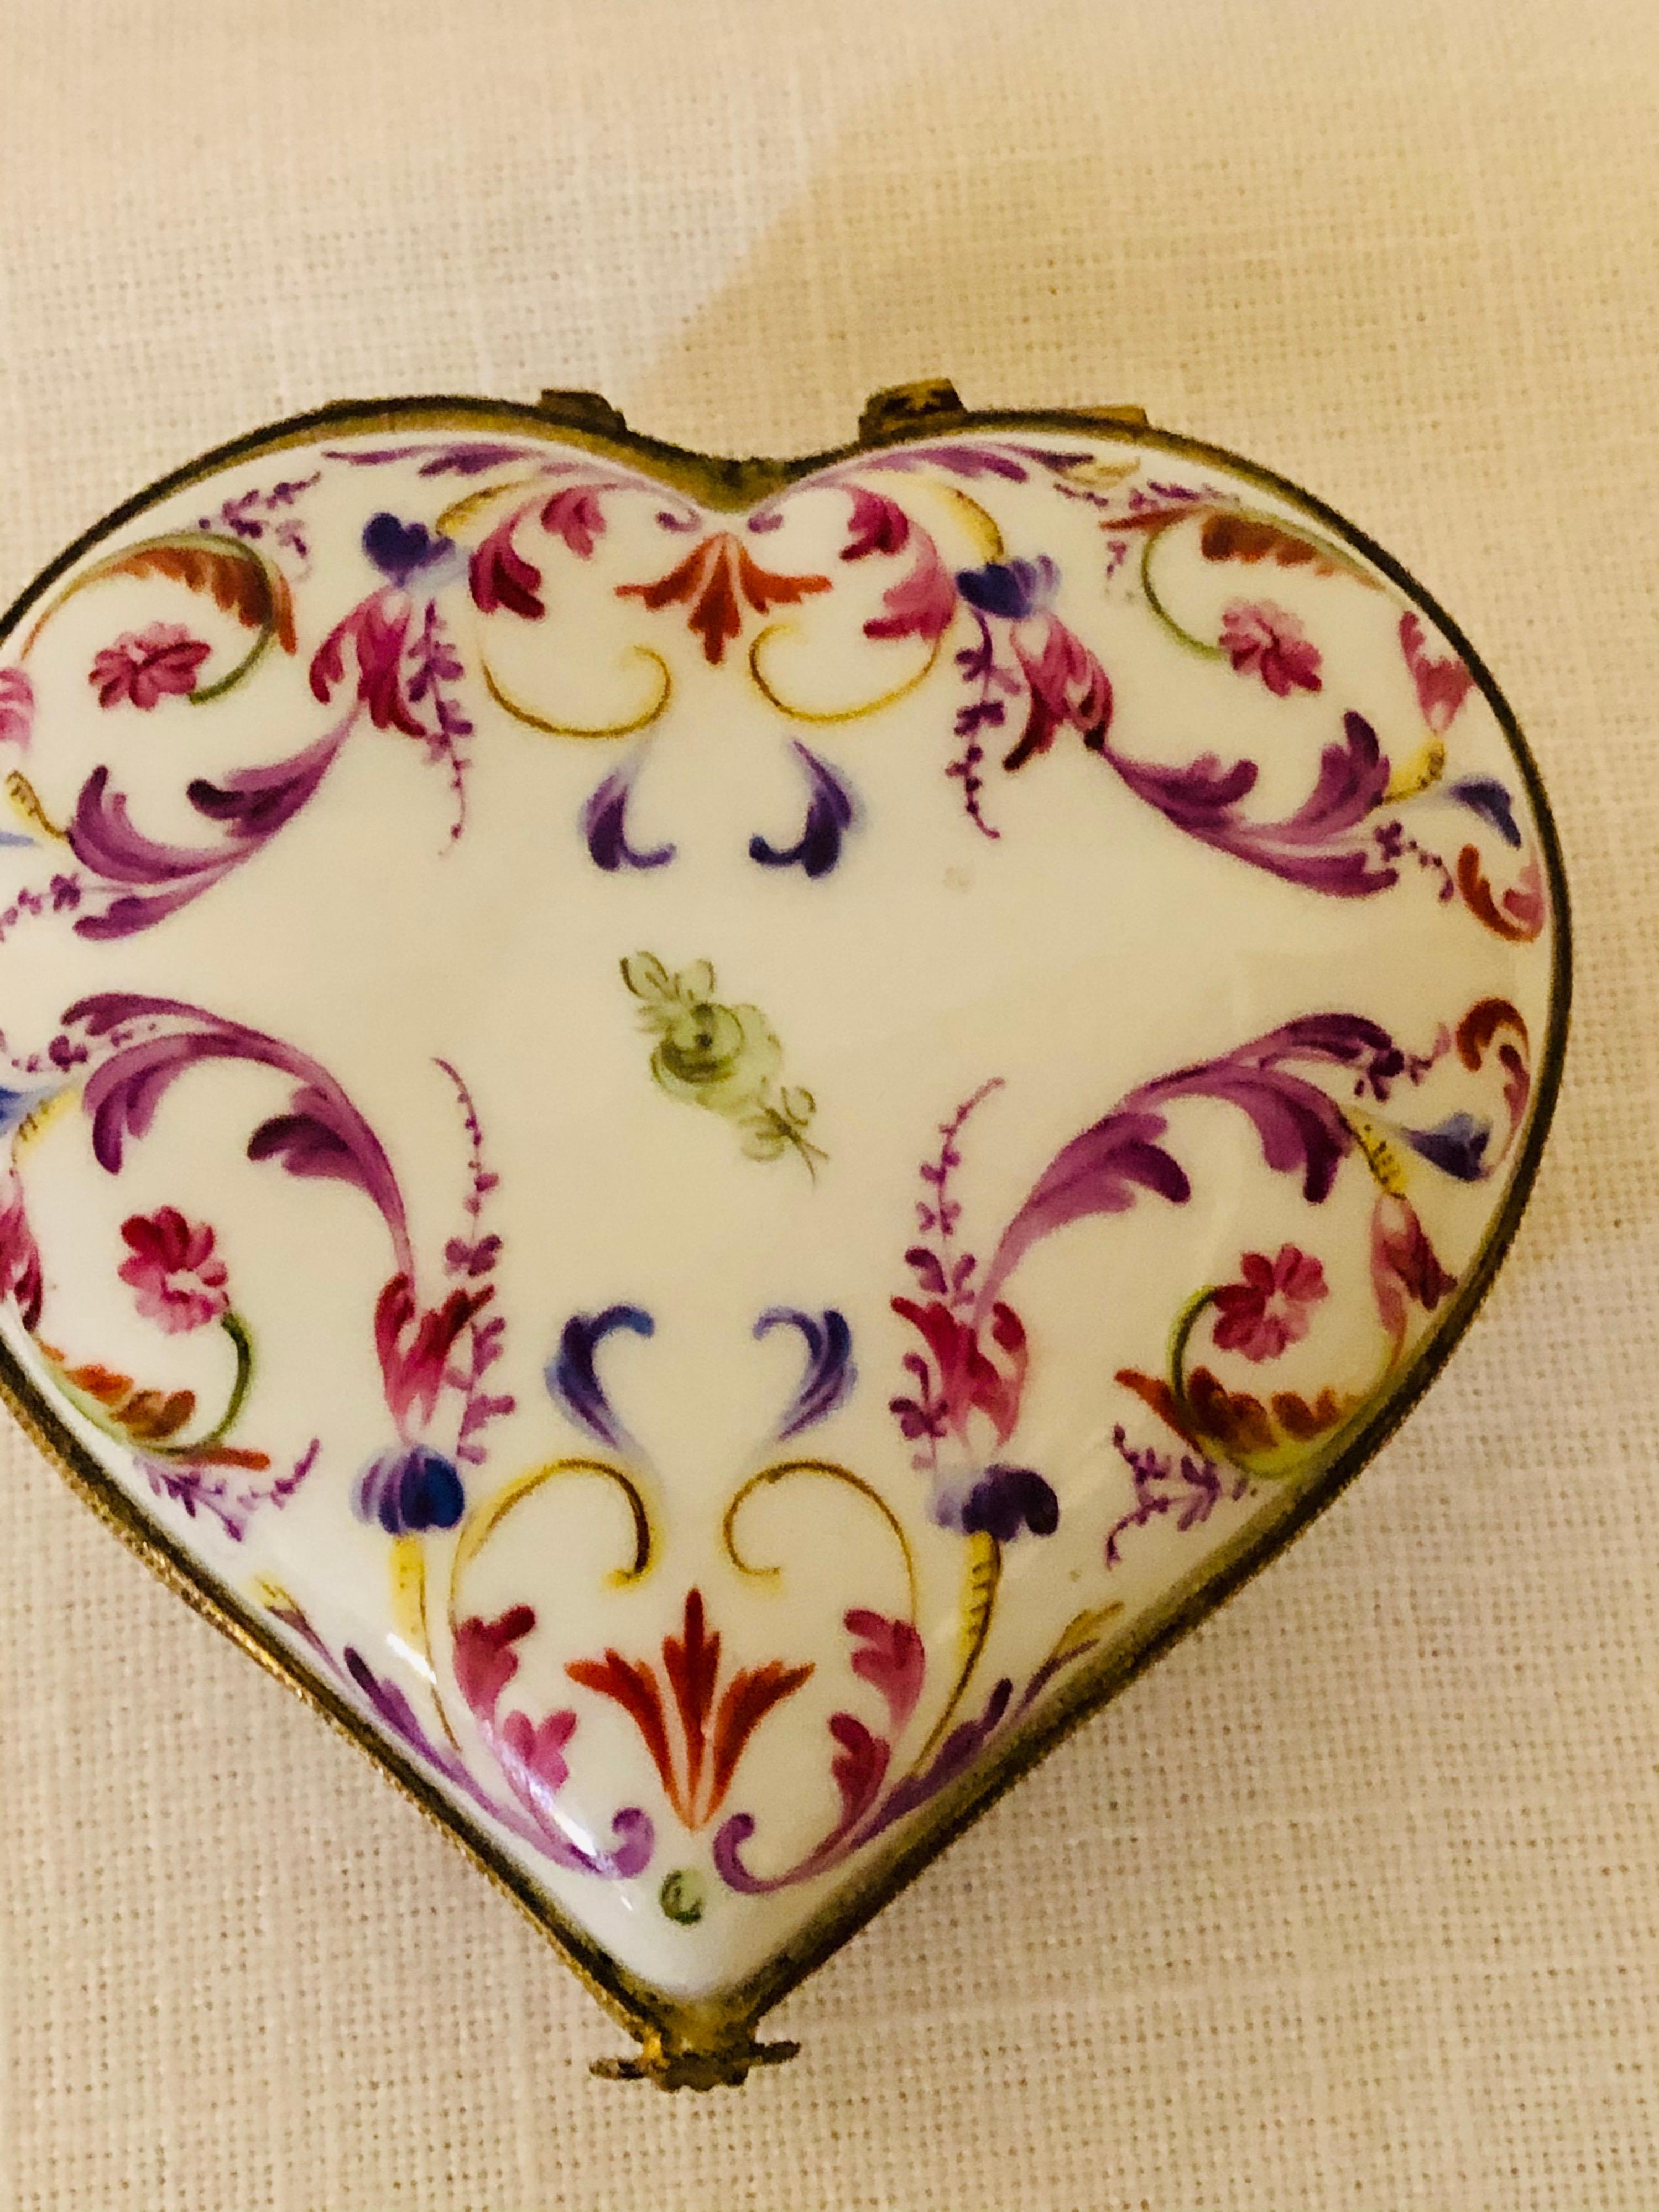 Le Tallec Heart Shape Box Hand-Painted with a Colorful Arabesque Decoration For Sale 1